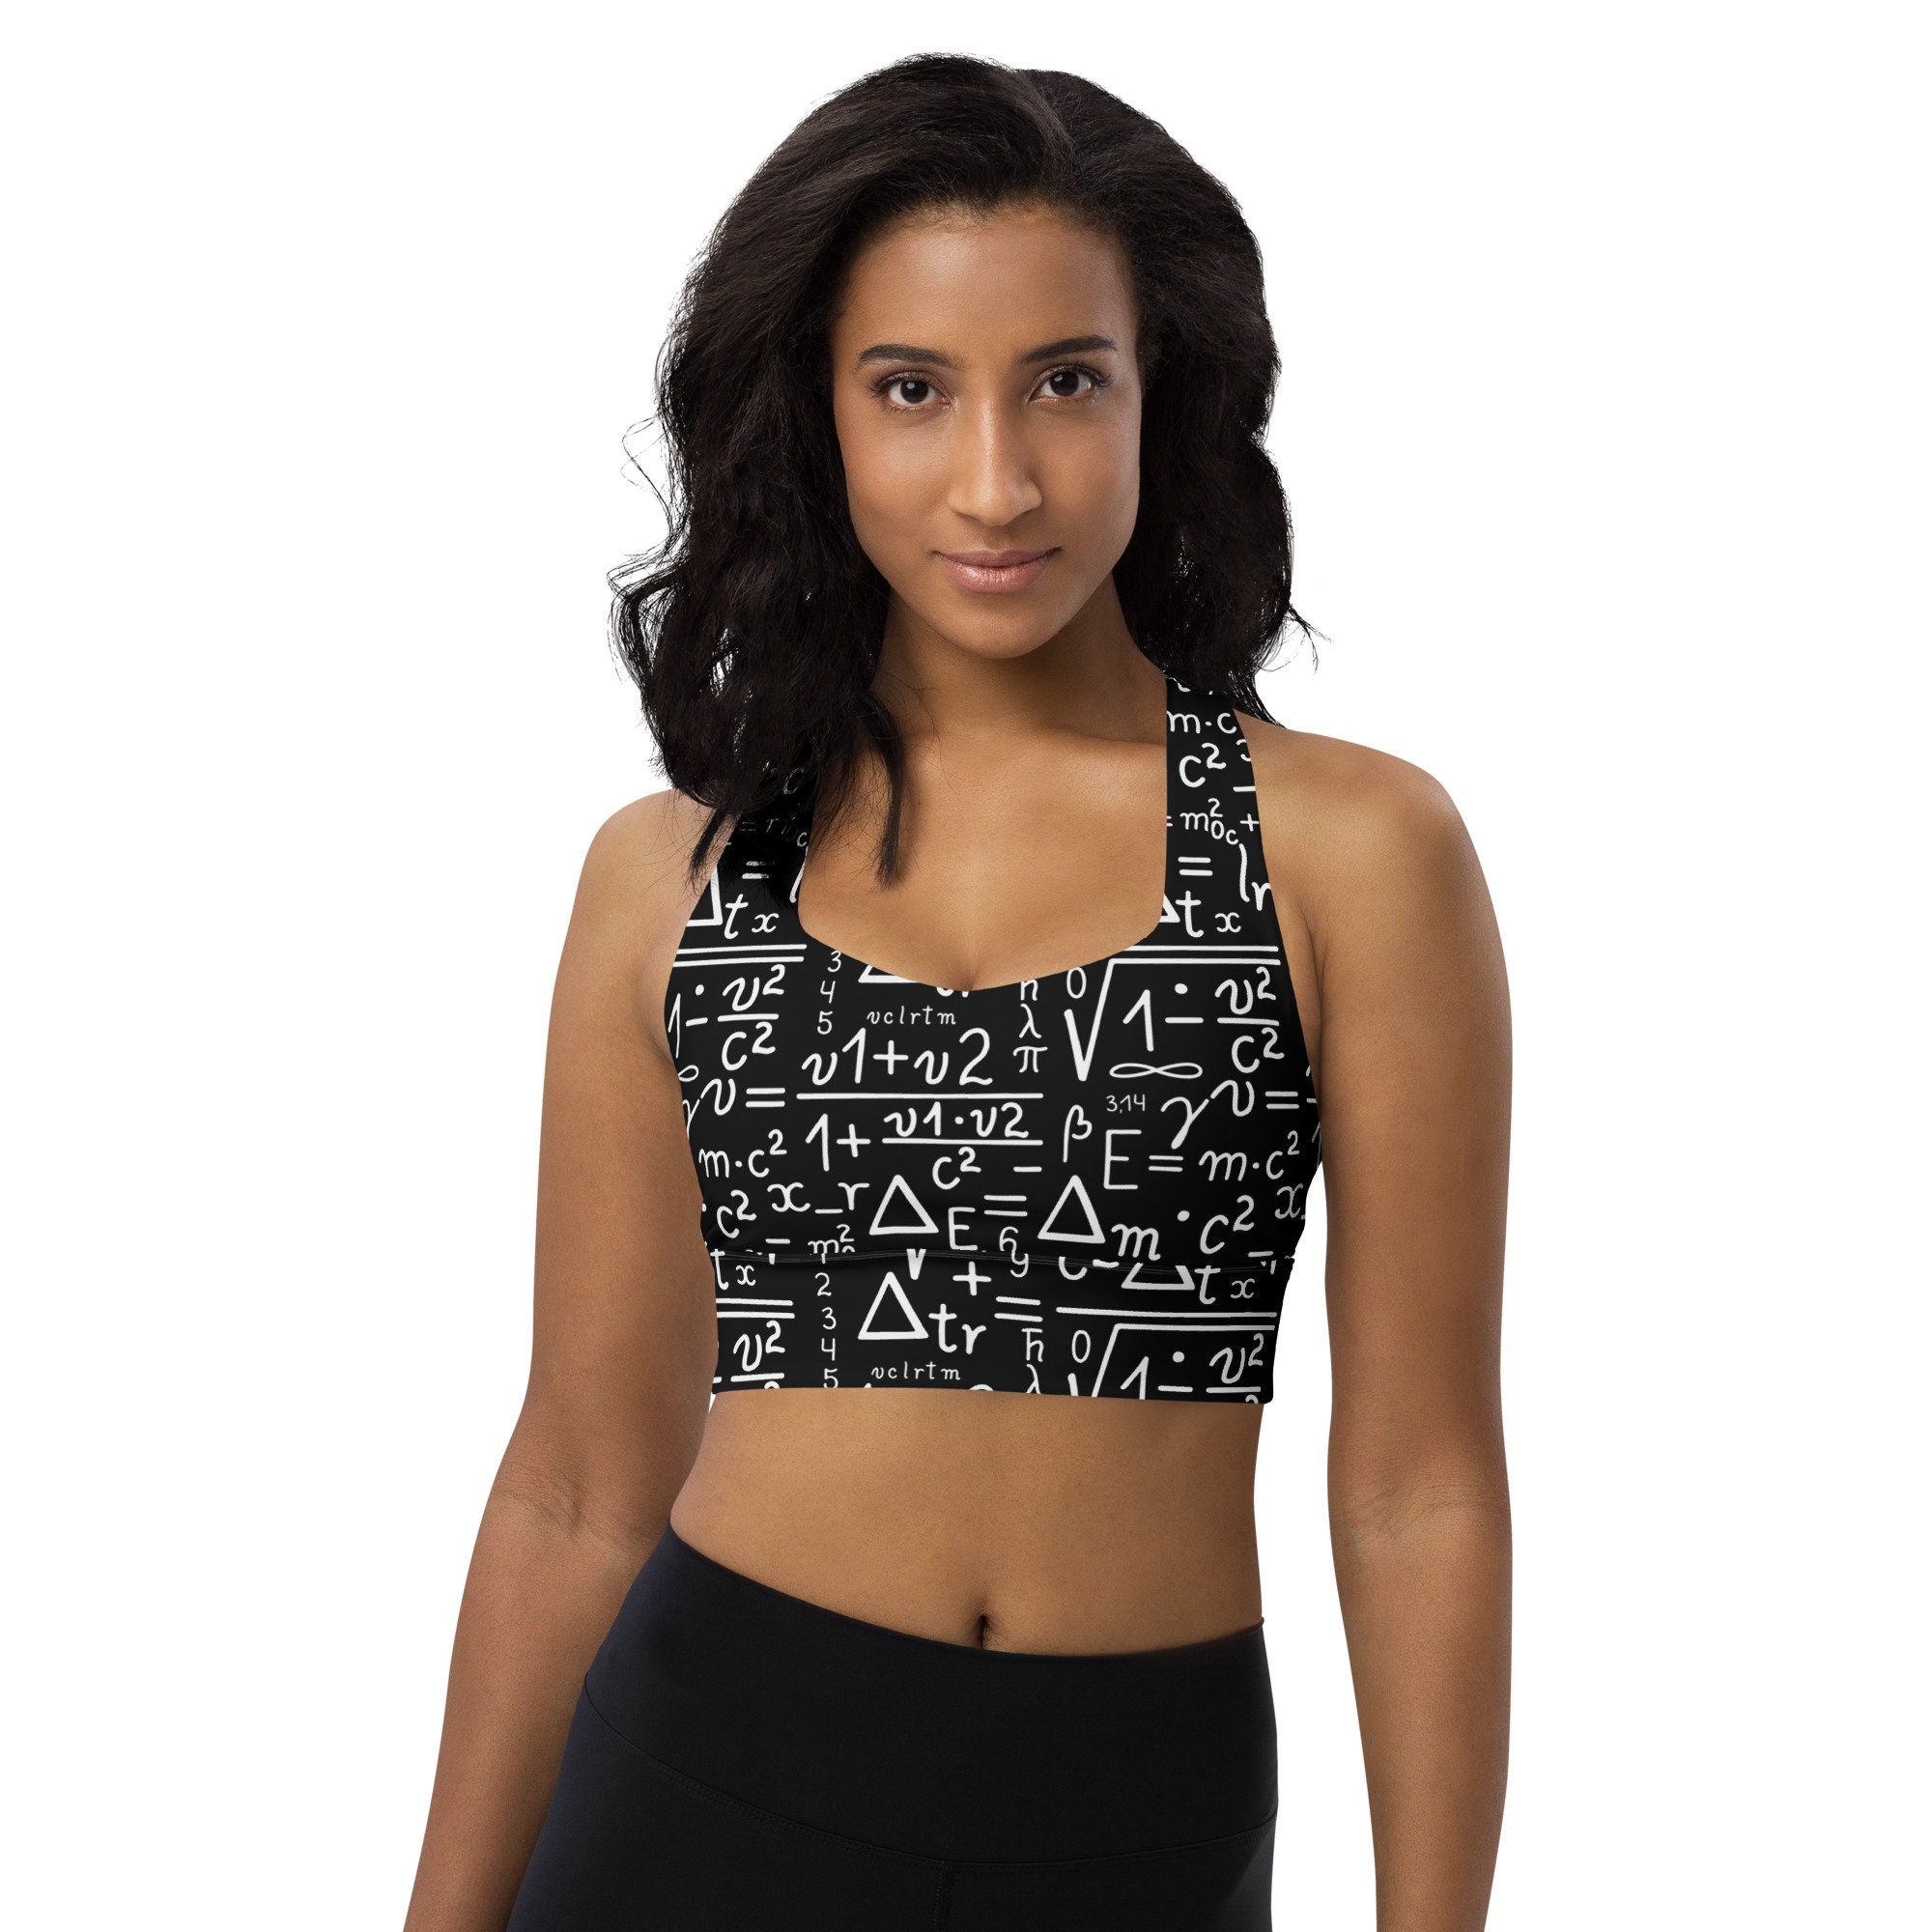 Abstract Padded Sports Bra